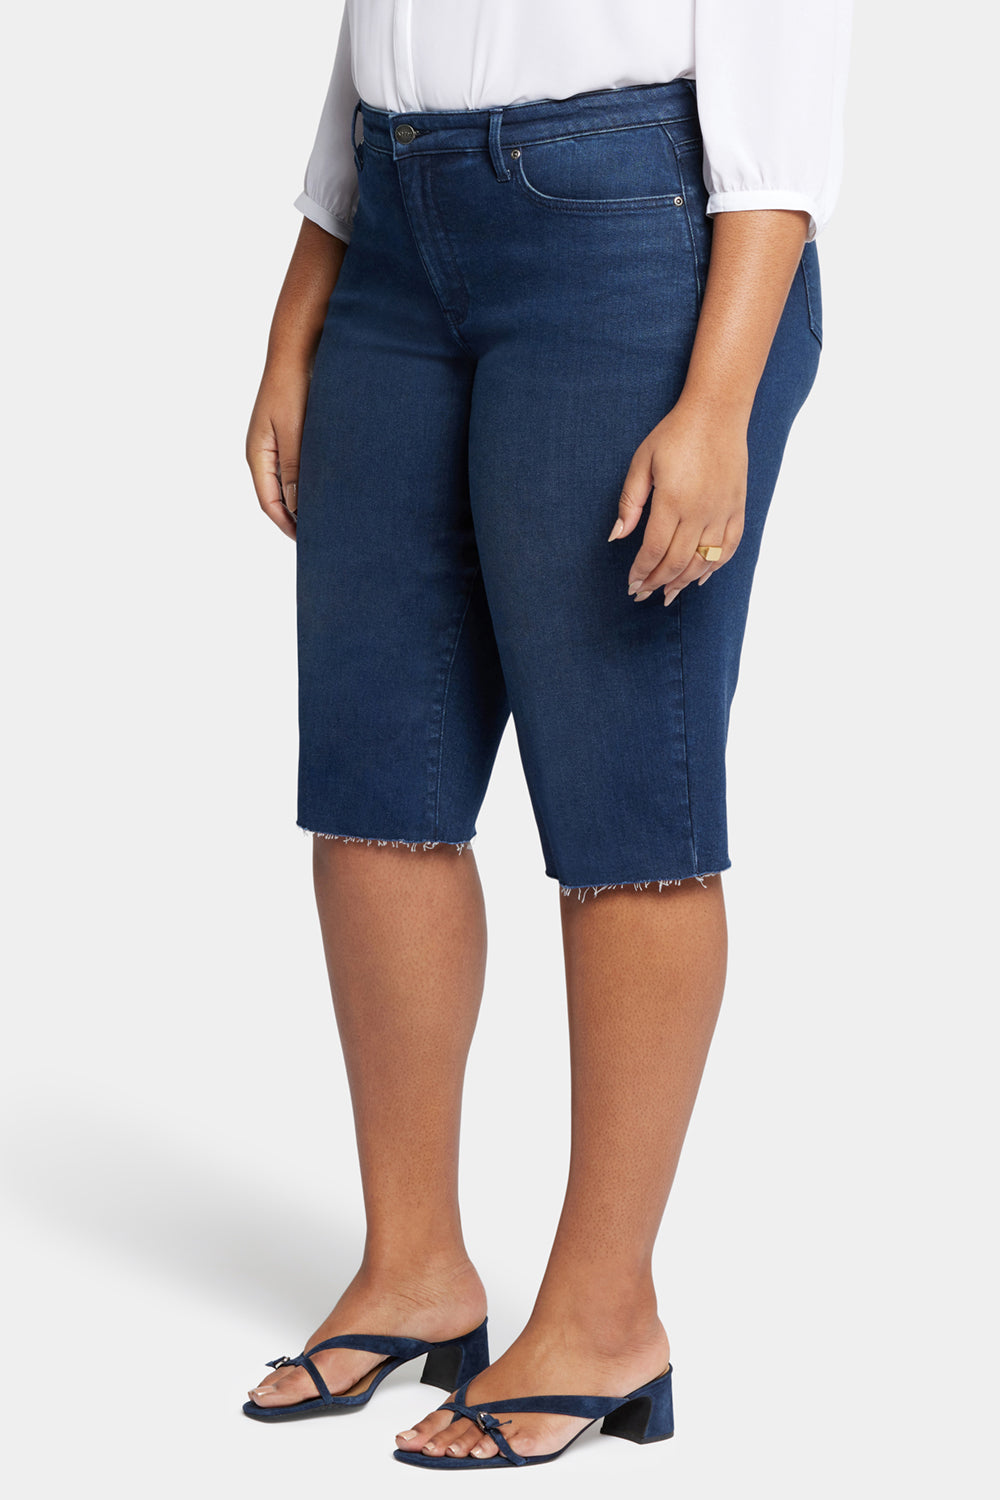 NYDJ Kristie 80s Bermuda Denim Shorts In Plus Size With Pressed Creases And Raw Hems - Inspire